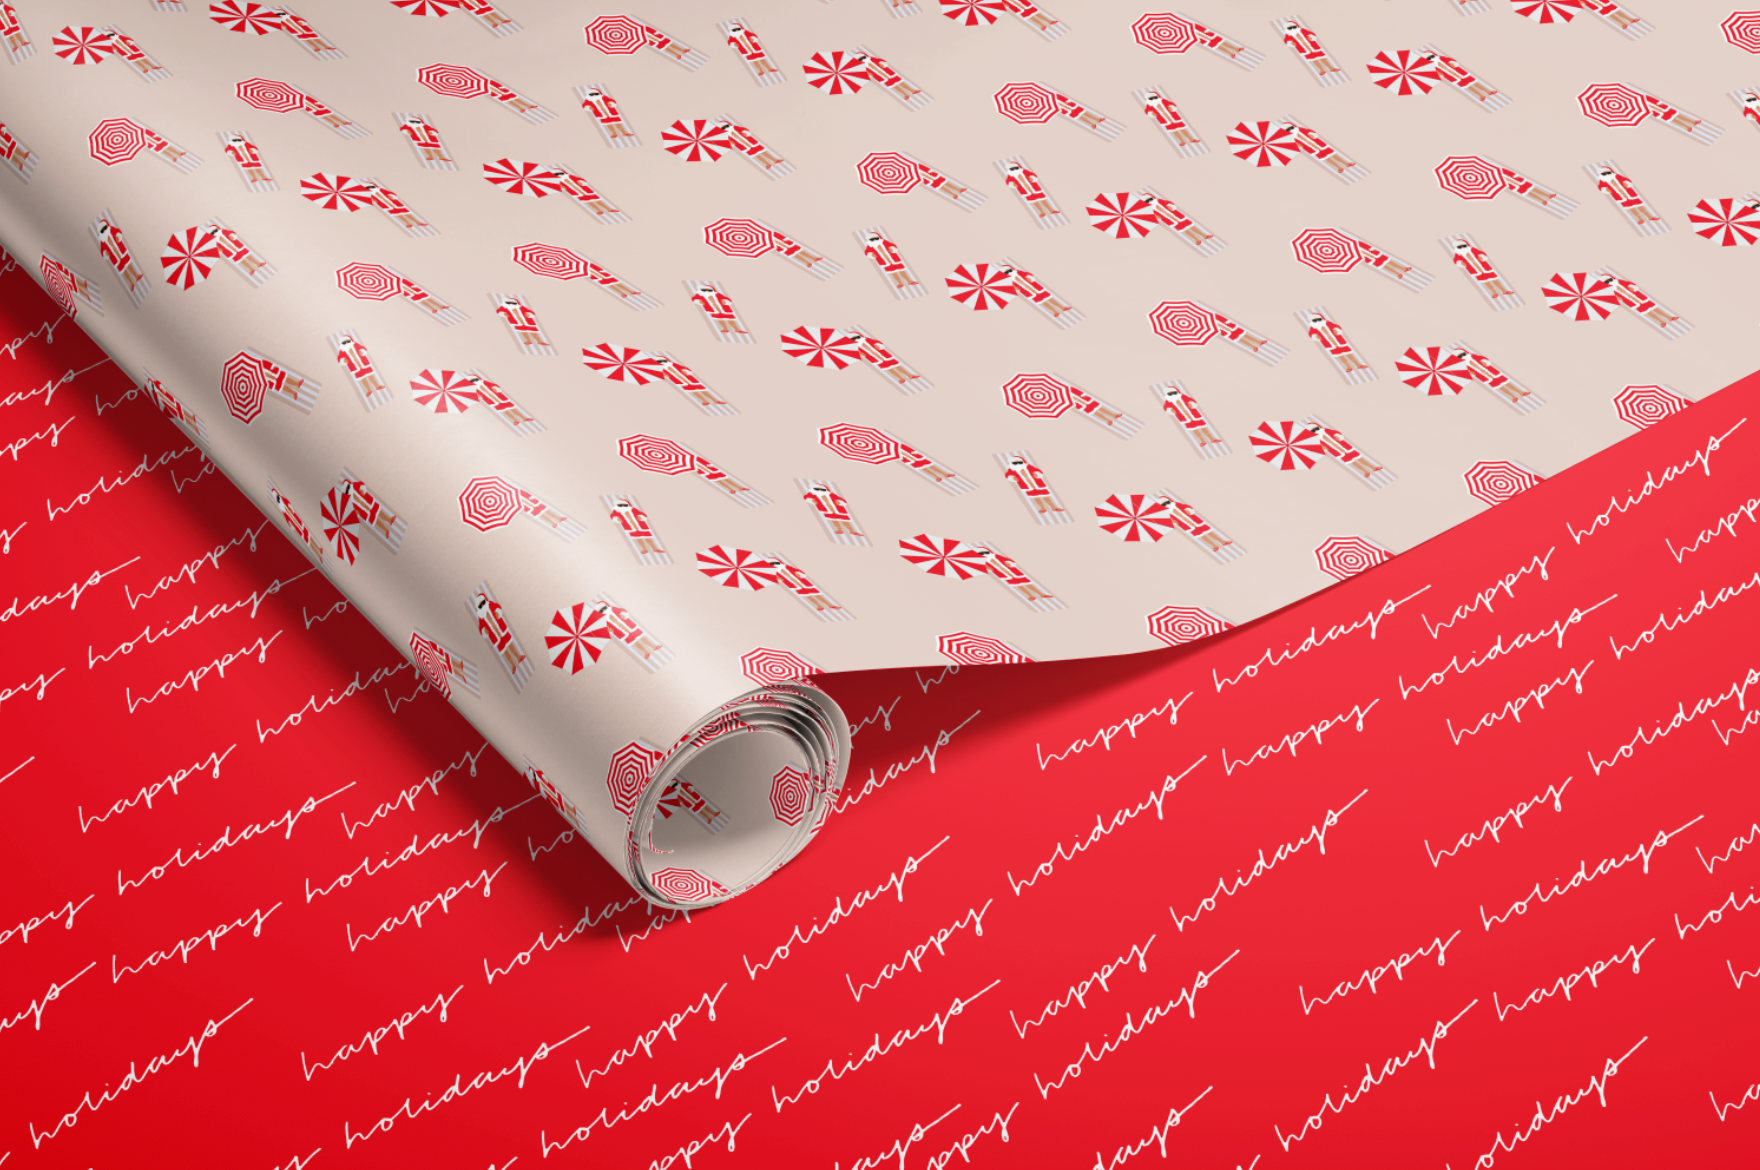 Santa on the Beach Wrapping Paper PRE-ORDER